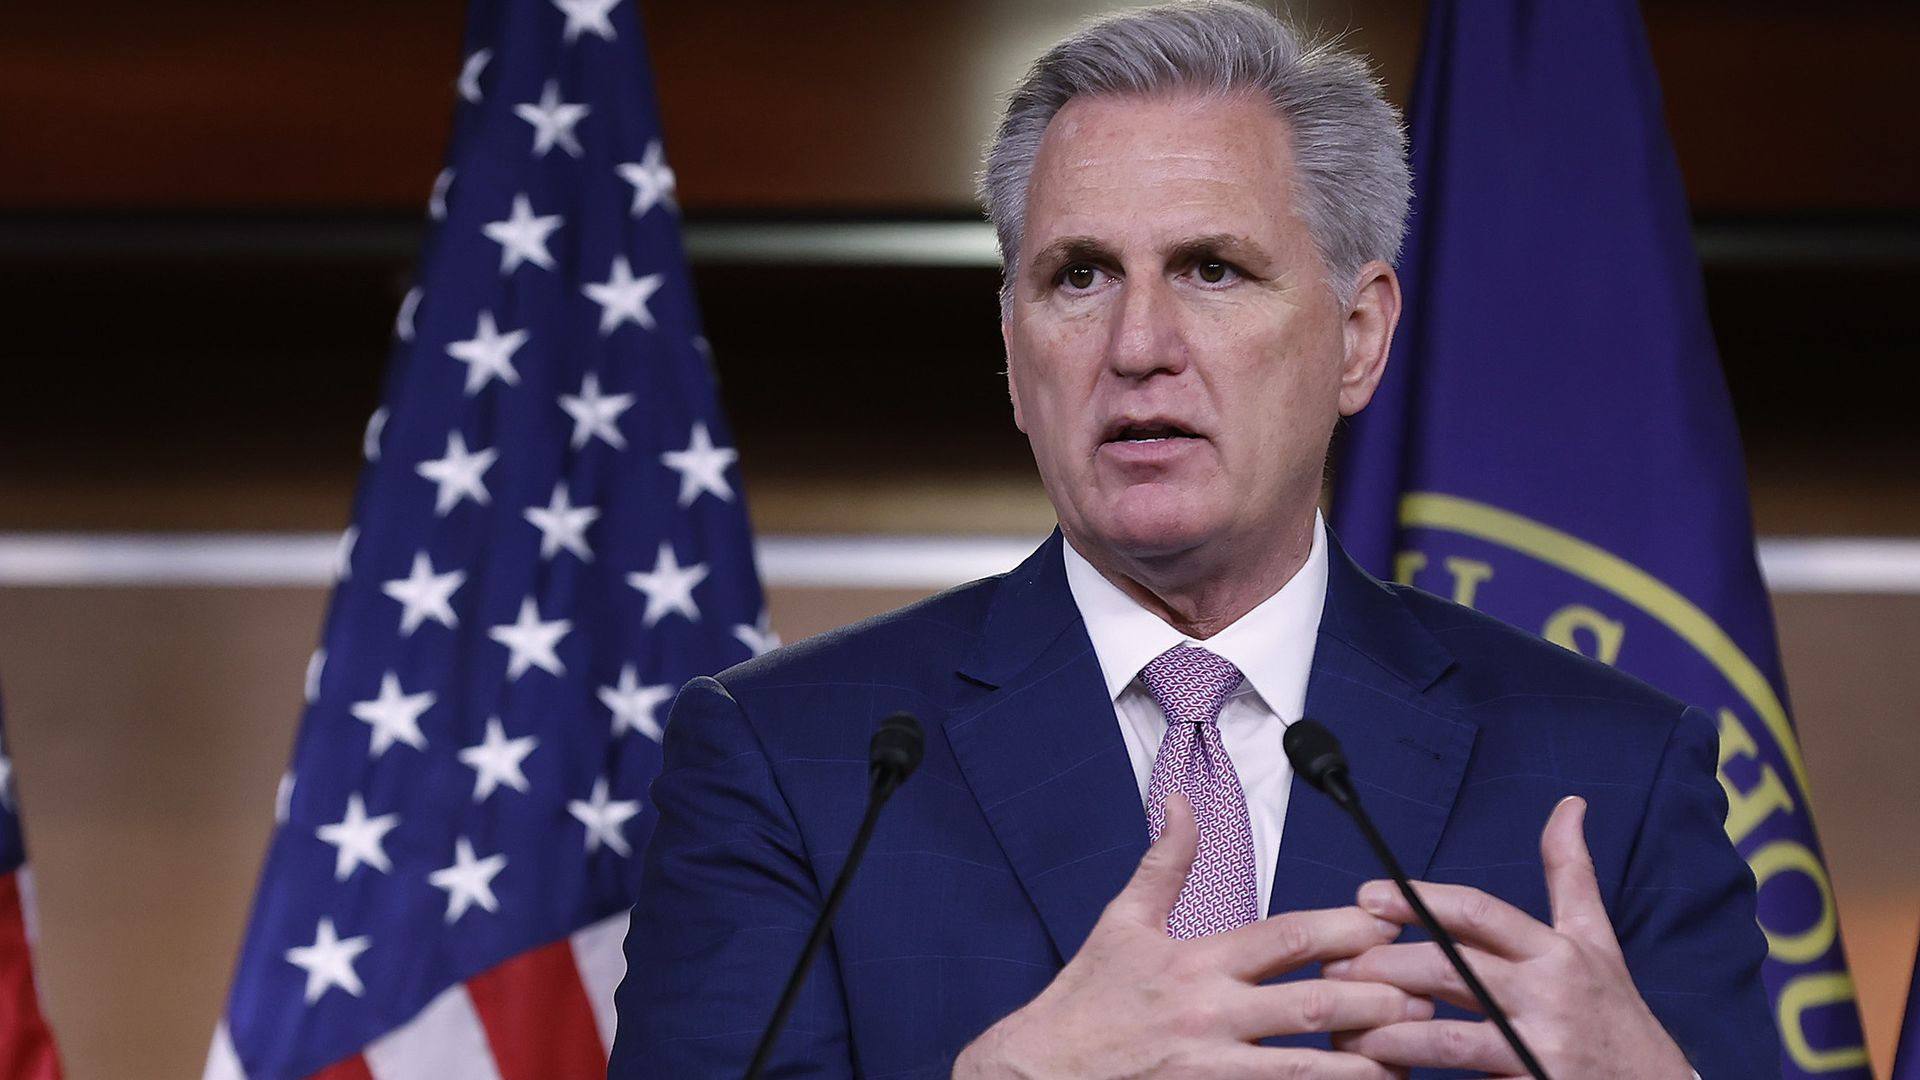 House Minority Leader Kevin McCarthy (R-CA) talks to reporters during his weekly news conference in the U.S. Capitol Visitors Center on March 18, 2022 